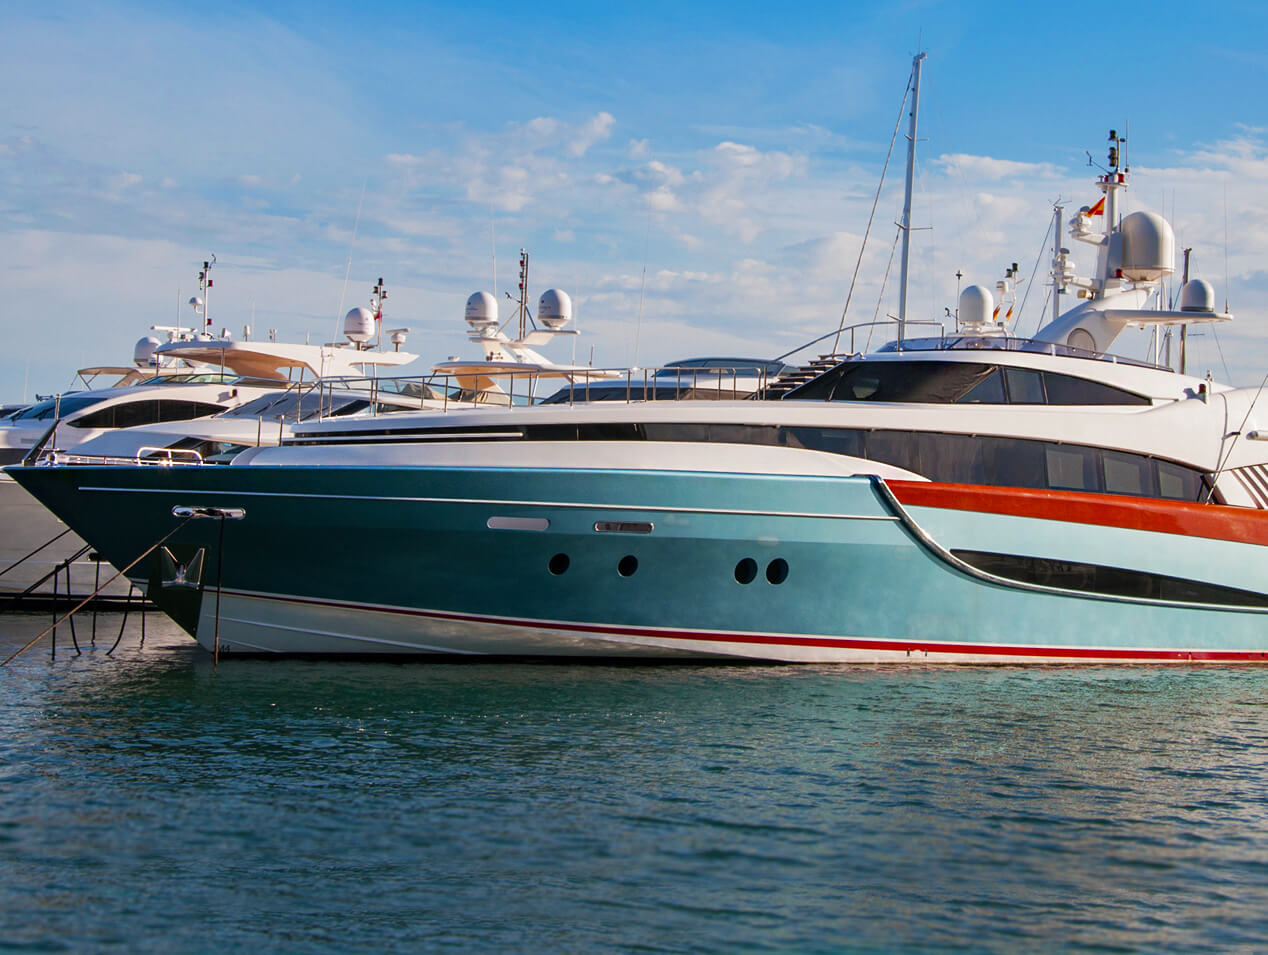 2020 Boat Hull Color Trends